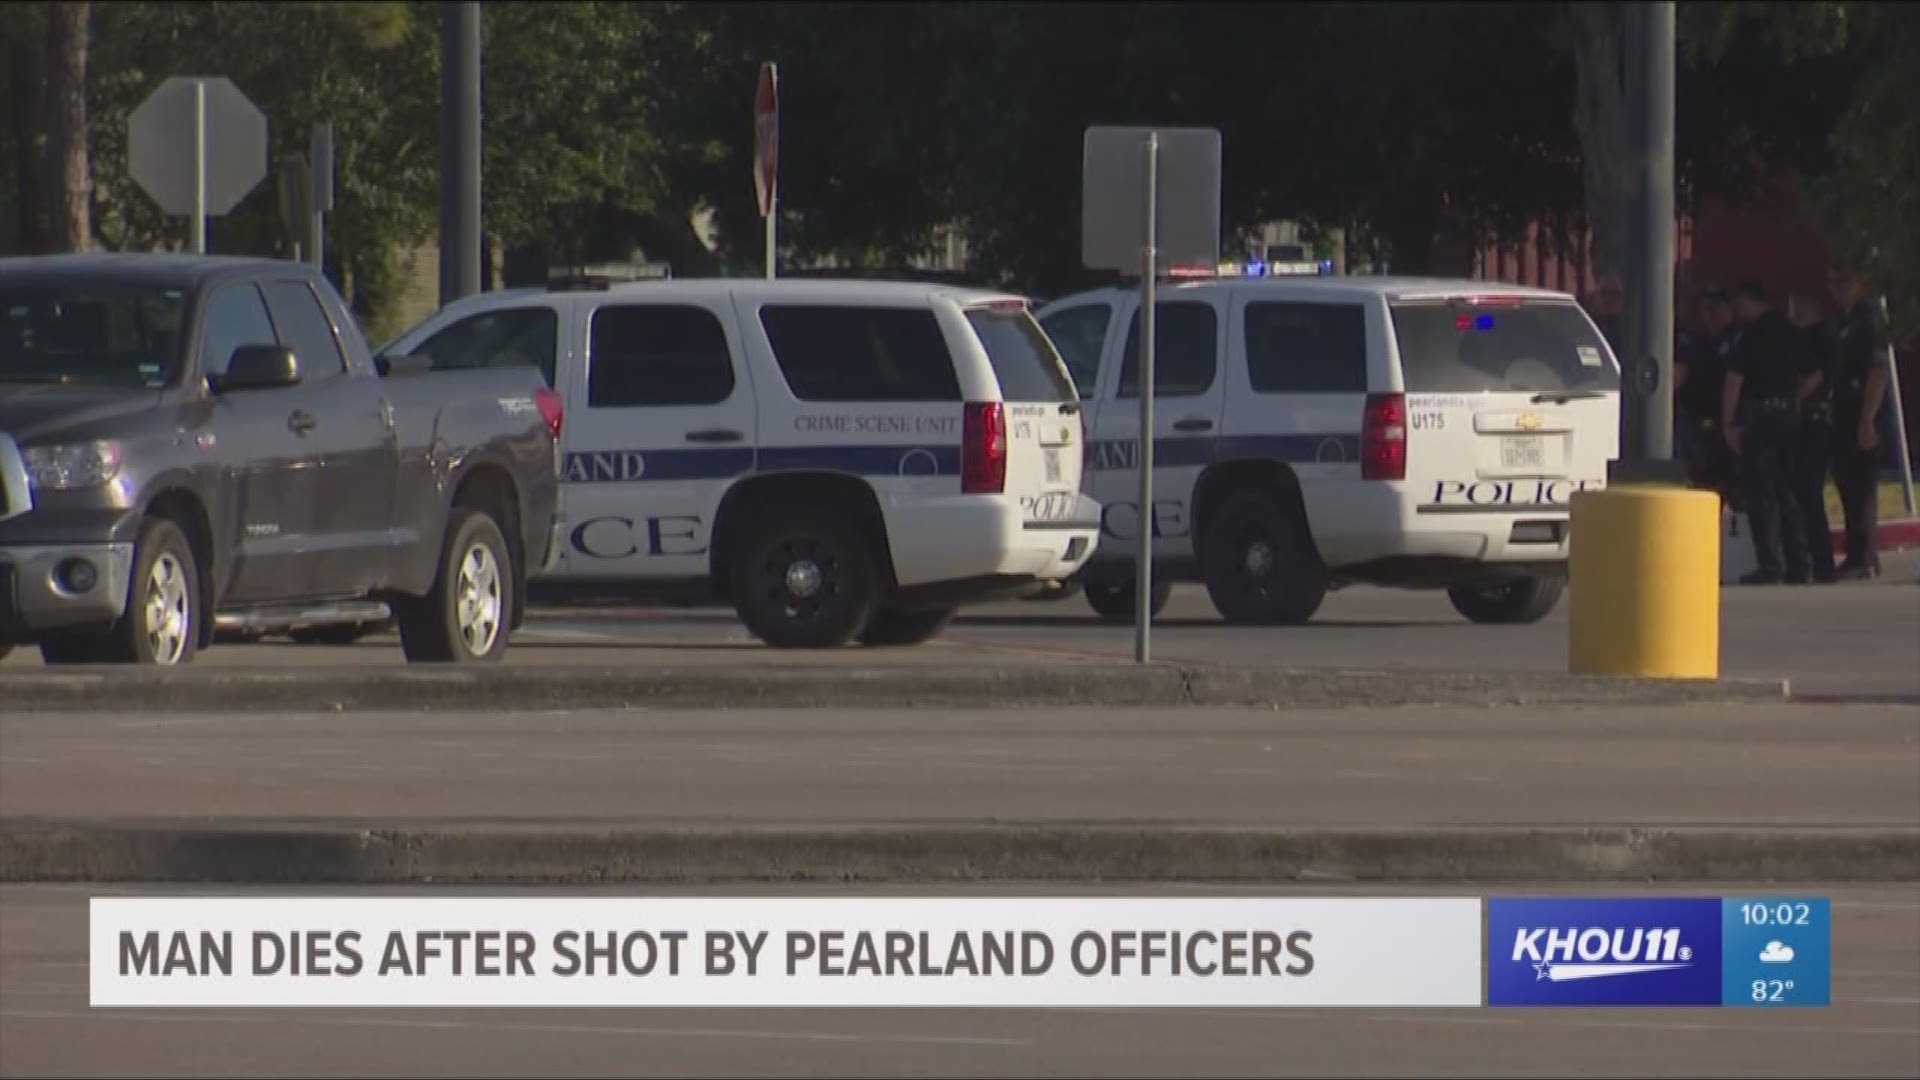 Police say the man shot by an officer at a Walmart in Pearland Tuesday evening has died.